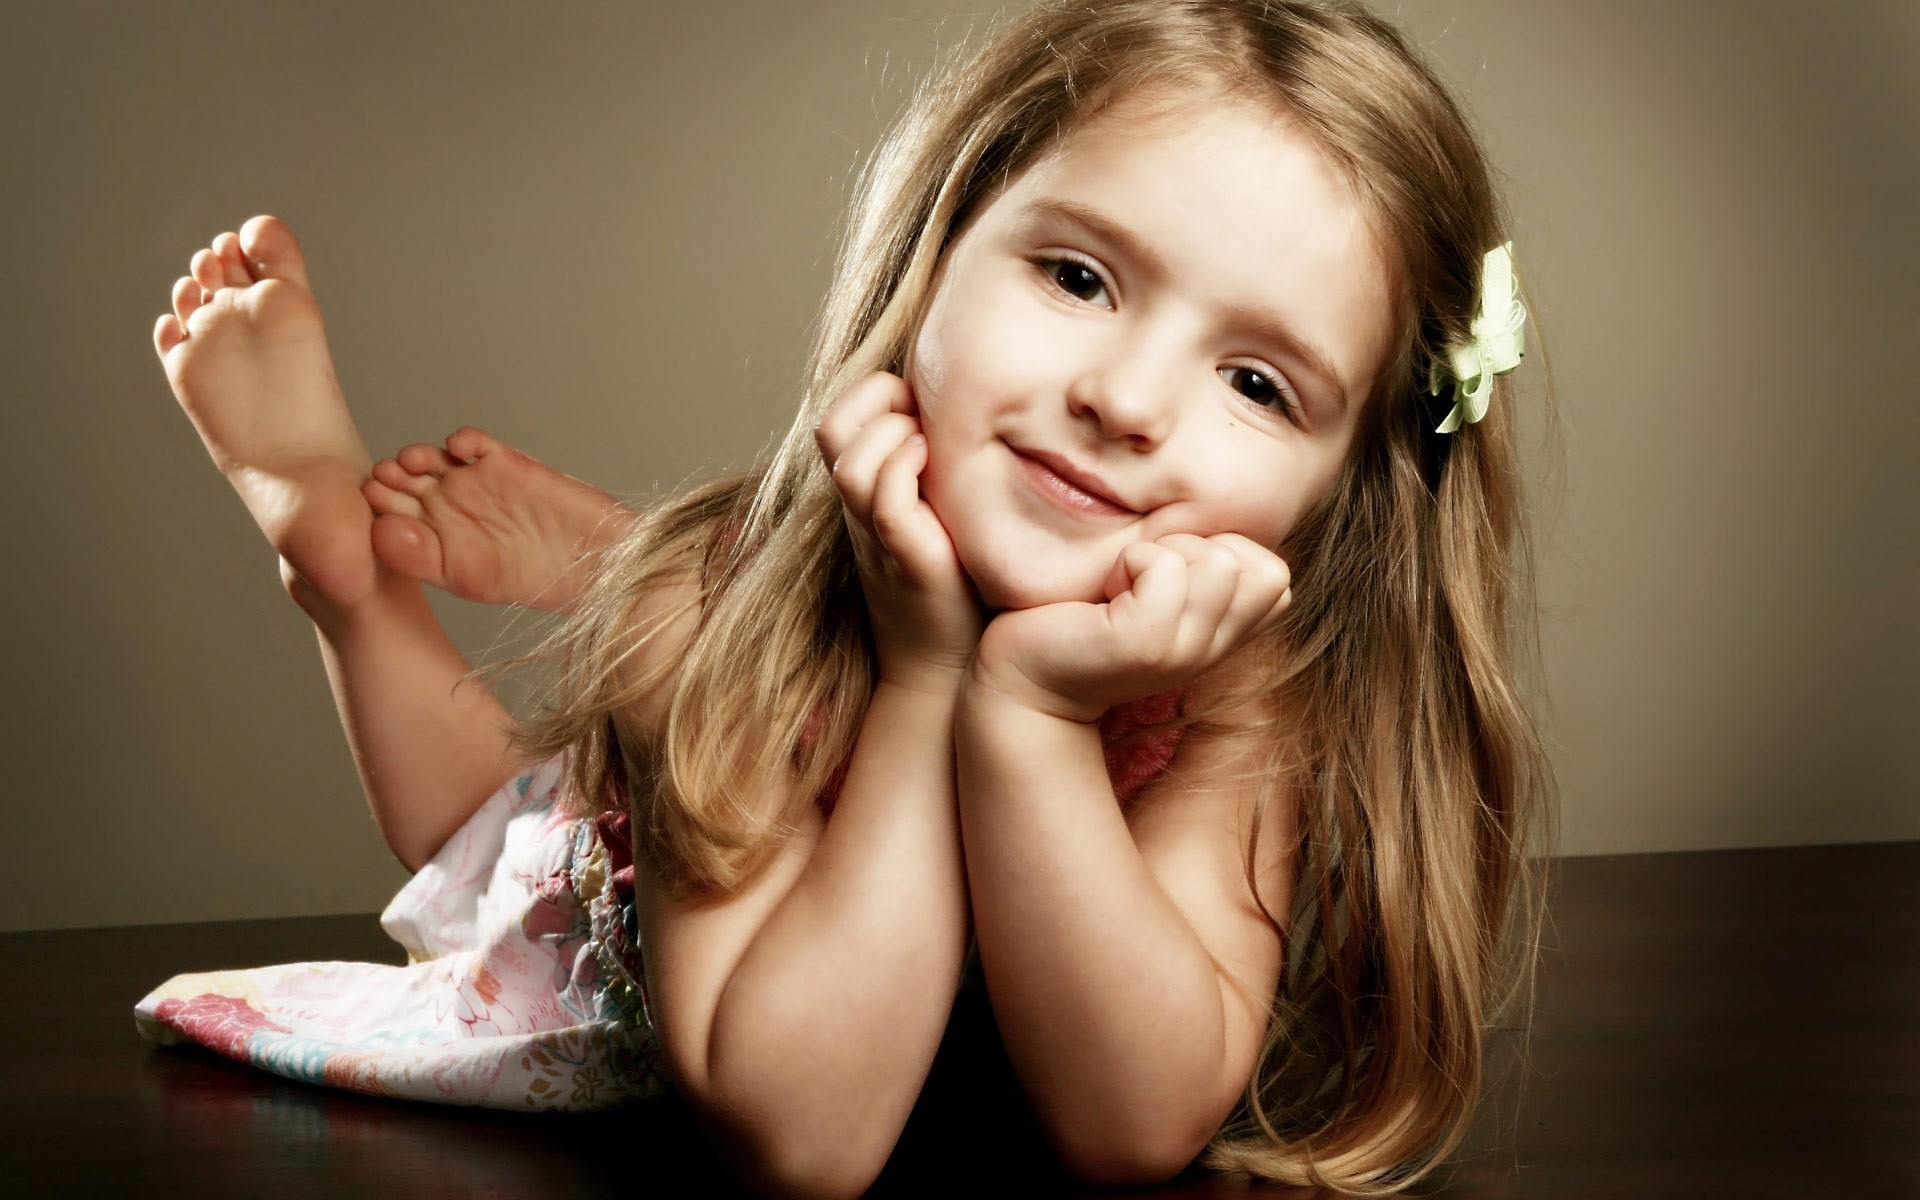 Pretty Cute Baby Girl Nice Wallpapers HD Wallpapers